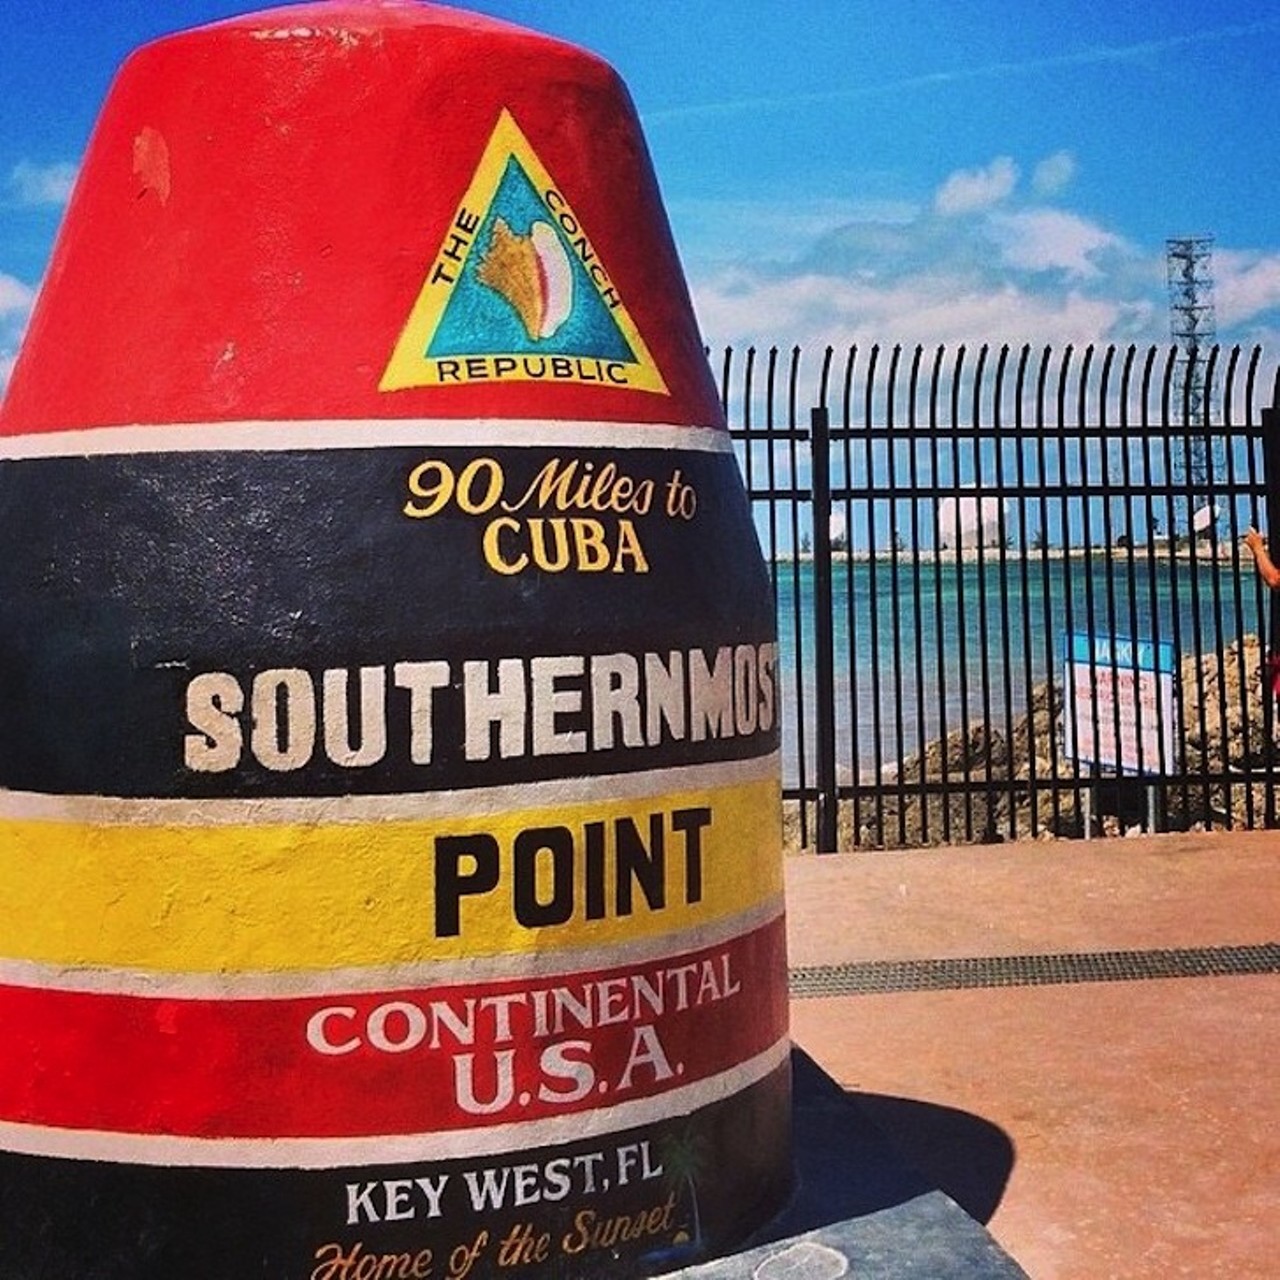 Stand at southernmost point of the U.S.
Southernmost Point Buoy l Whitehead St, Key West l (305) 809-3700
Technically, it&#146;s only the southernmost point of the continental United States &#151; Hawaii is actually closer to the equator &#151; but it&#146;s still as close as most of us are ever going to get. This giant concrete monument might be living a lie, but none of your friends are going to know it, so you can still brag about it after snapping a pic for your Instagram.
Photo via Eriberto O./Yelp